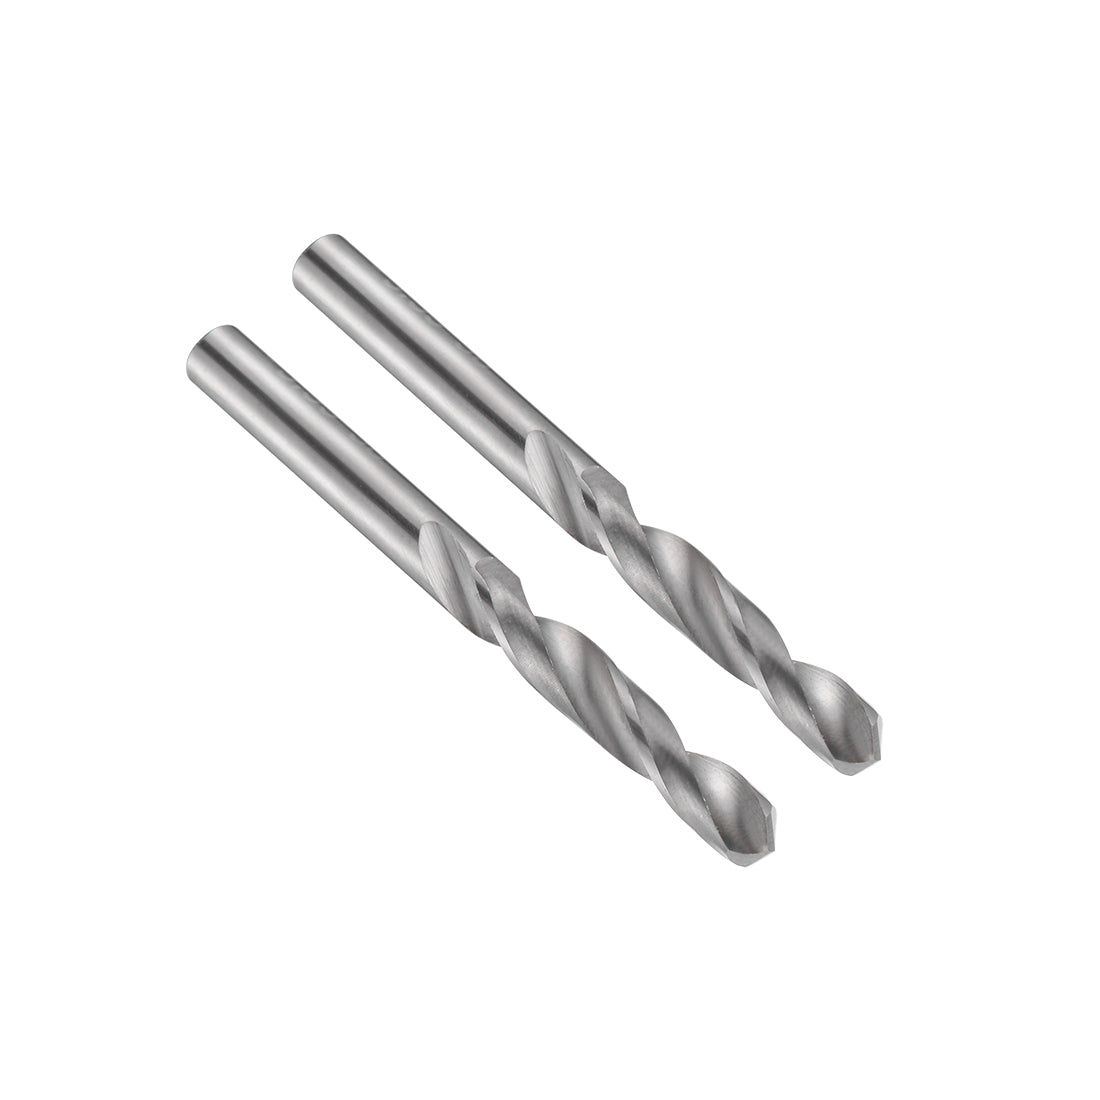 uxcell Uxcell 3.35mm Solid Carbide Drill Bits Straight Shank for Stainless Steel Alloy 2 Pcs